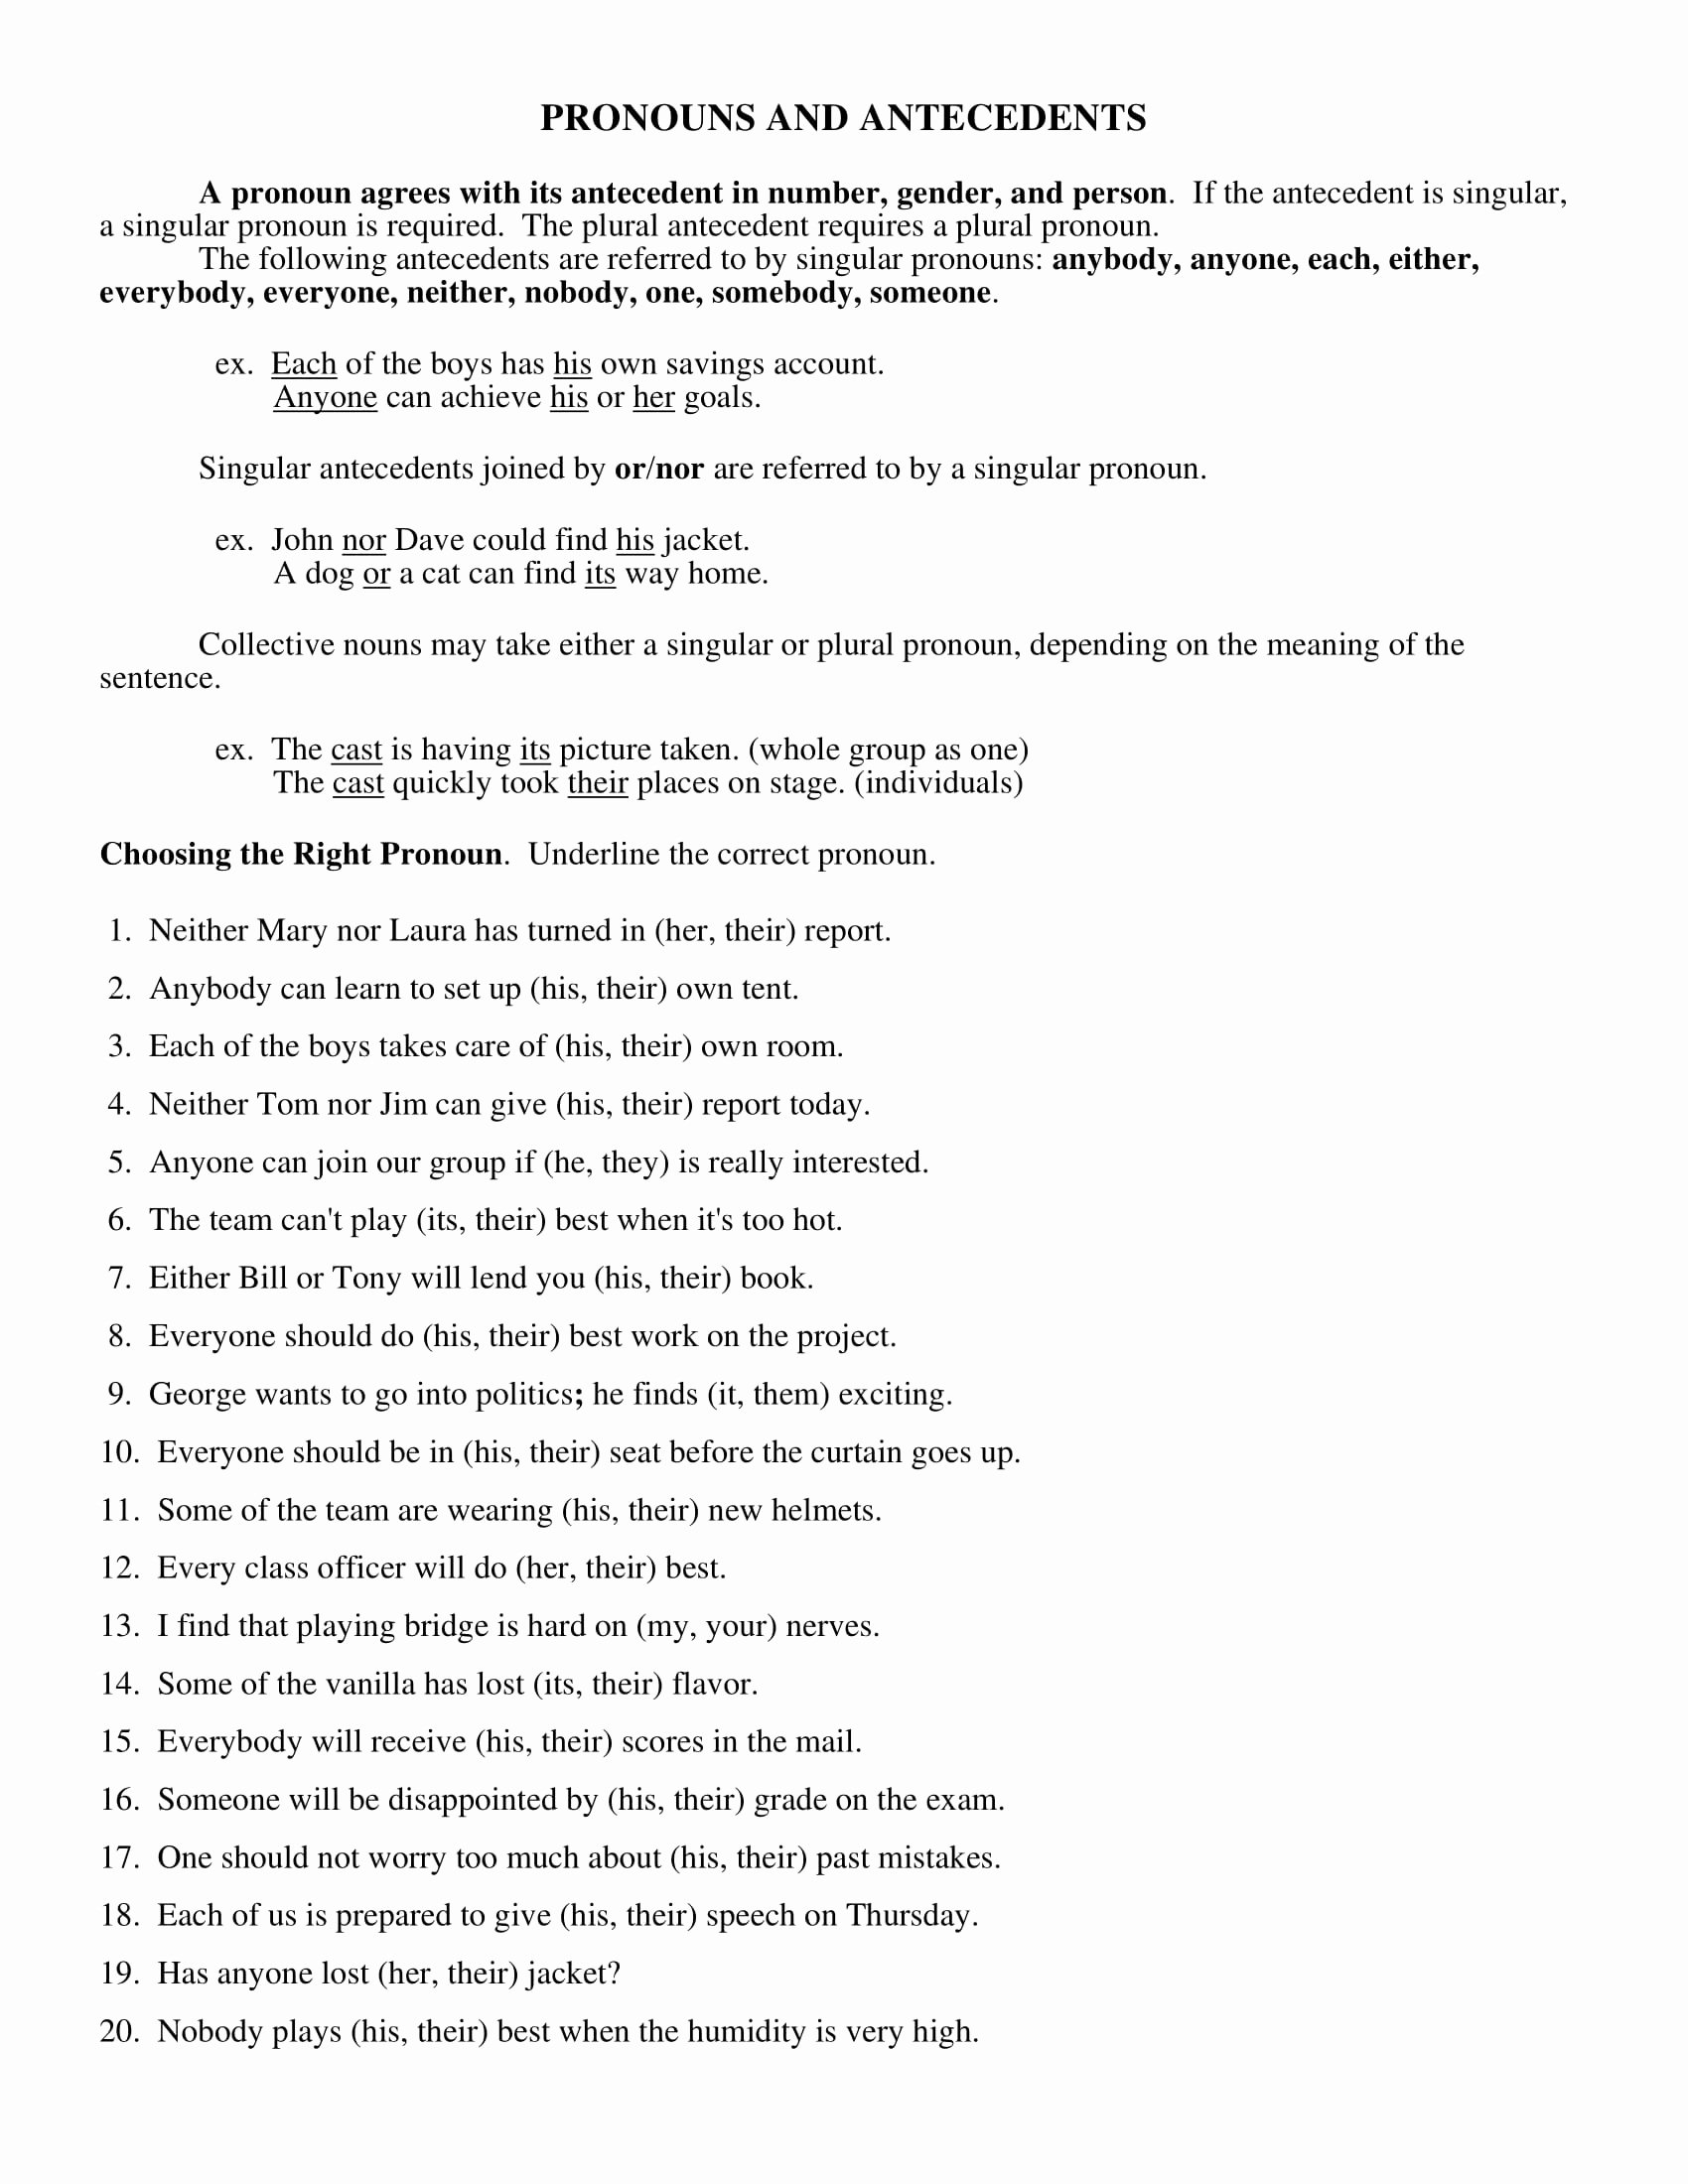 Pronouns and Antecedents Worksheet Awesome 15 Antecedent Examples Pdf Doc